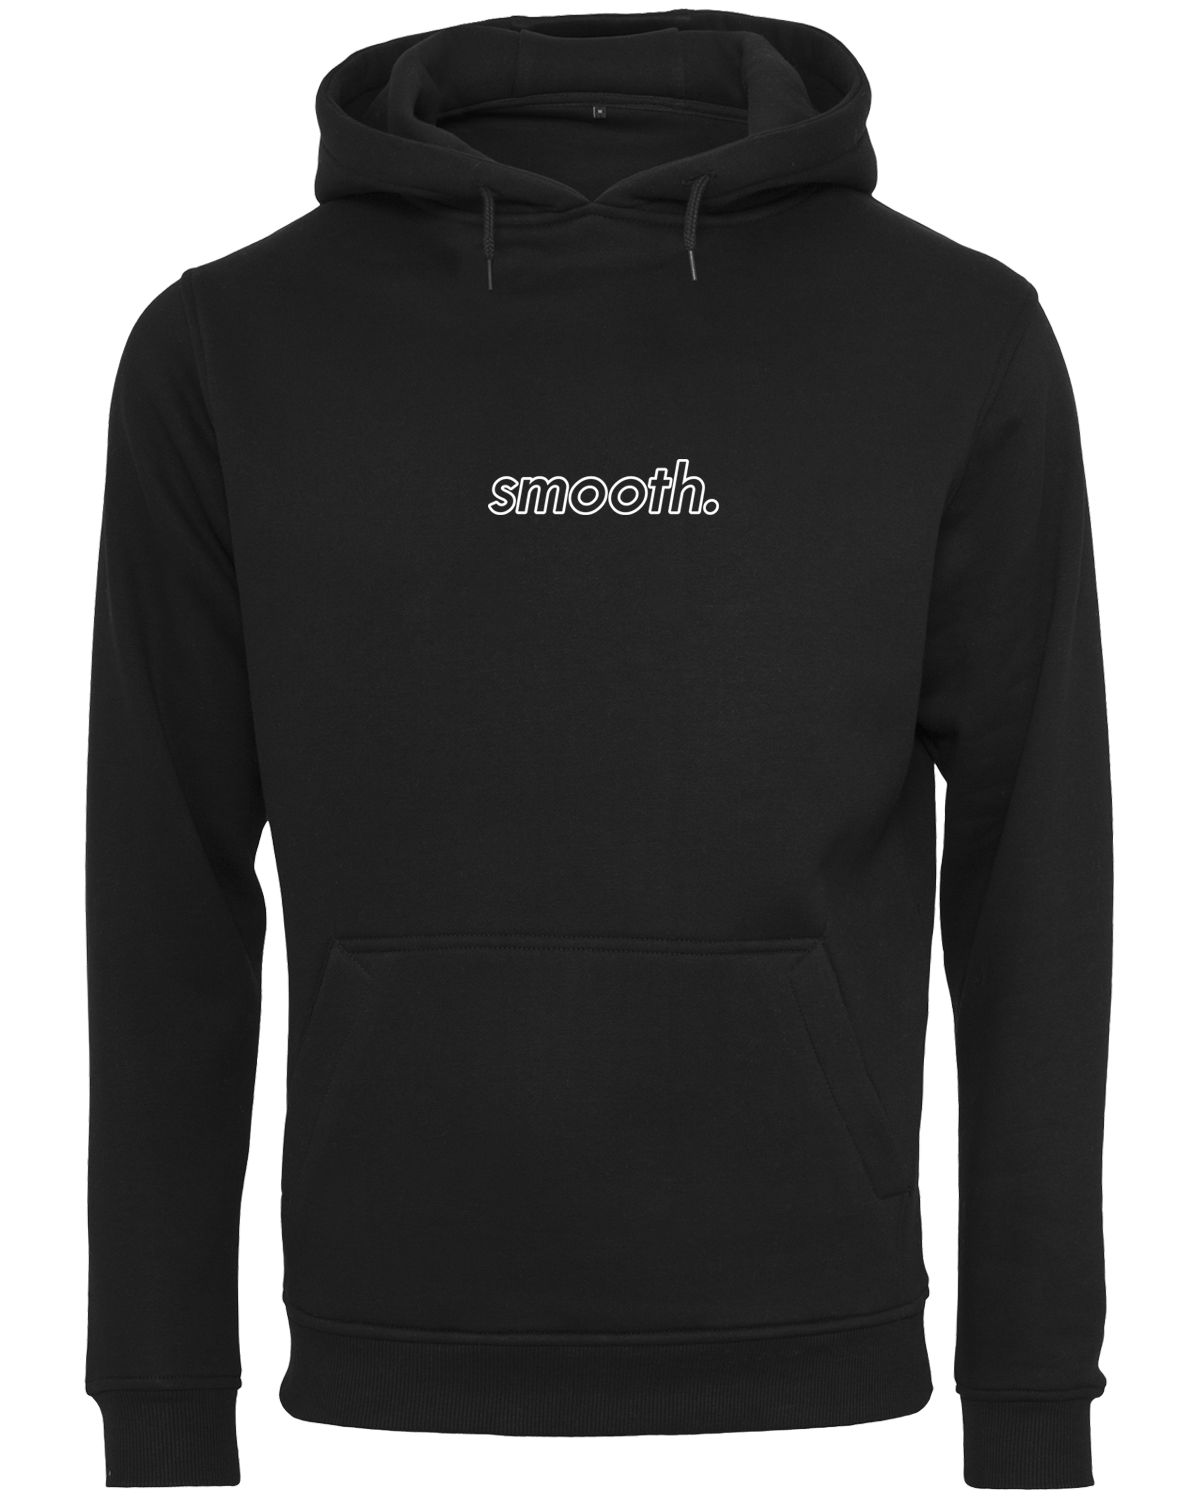 Black Hoodie / Outlined White Women